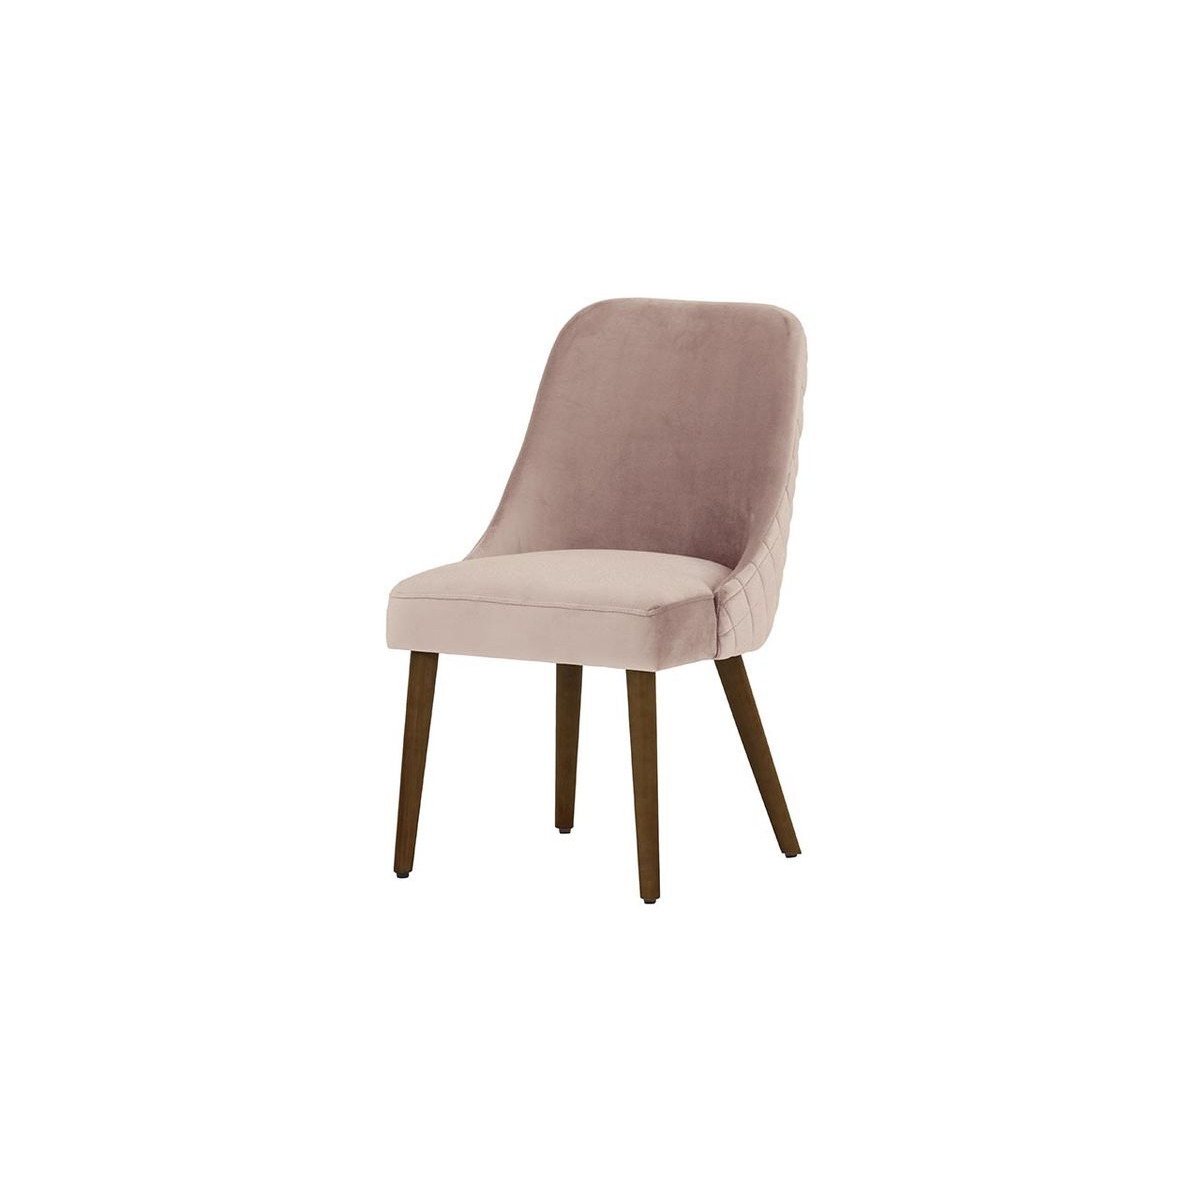 Albion Dining Chair with Stitching, graphite, Leg colour: dark oak - image 1